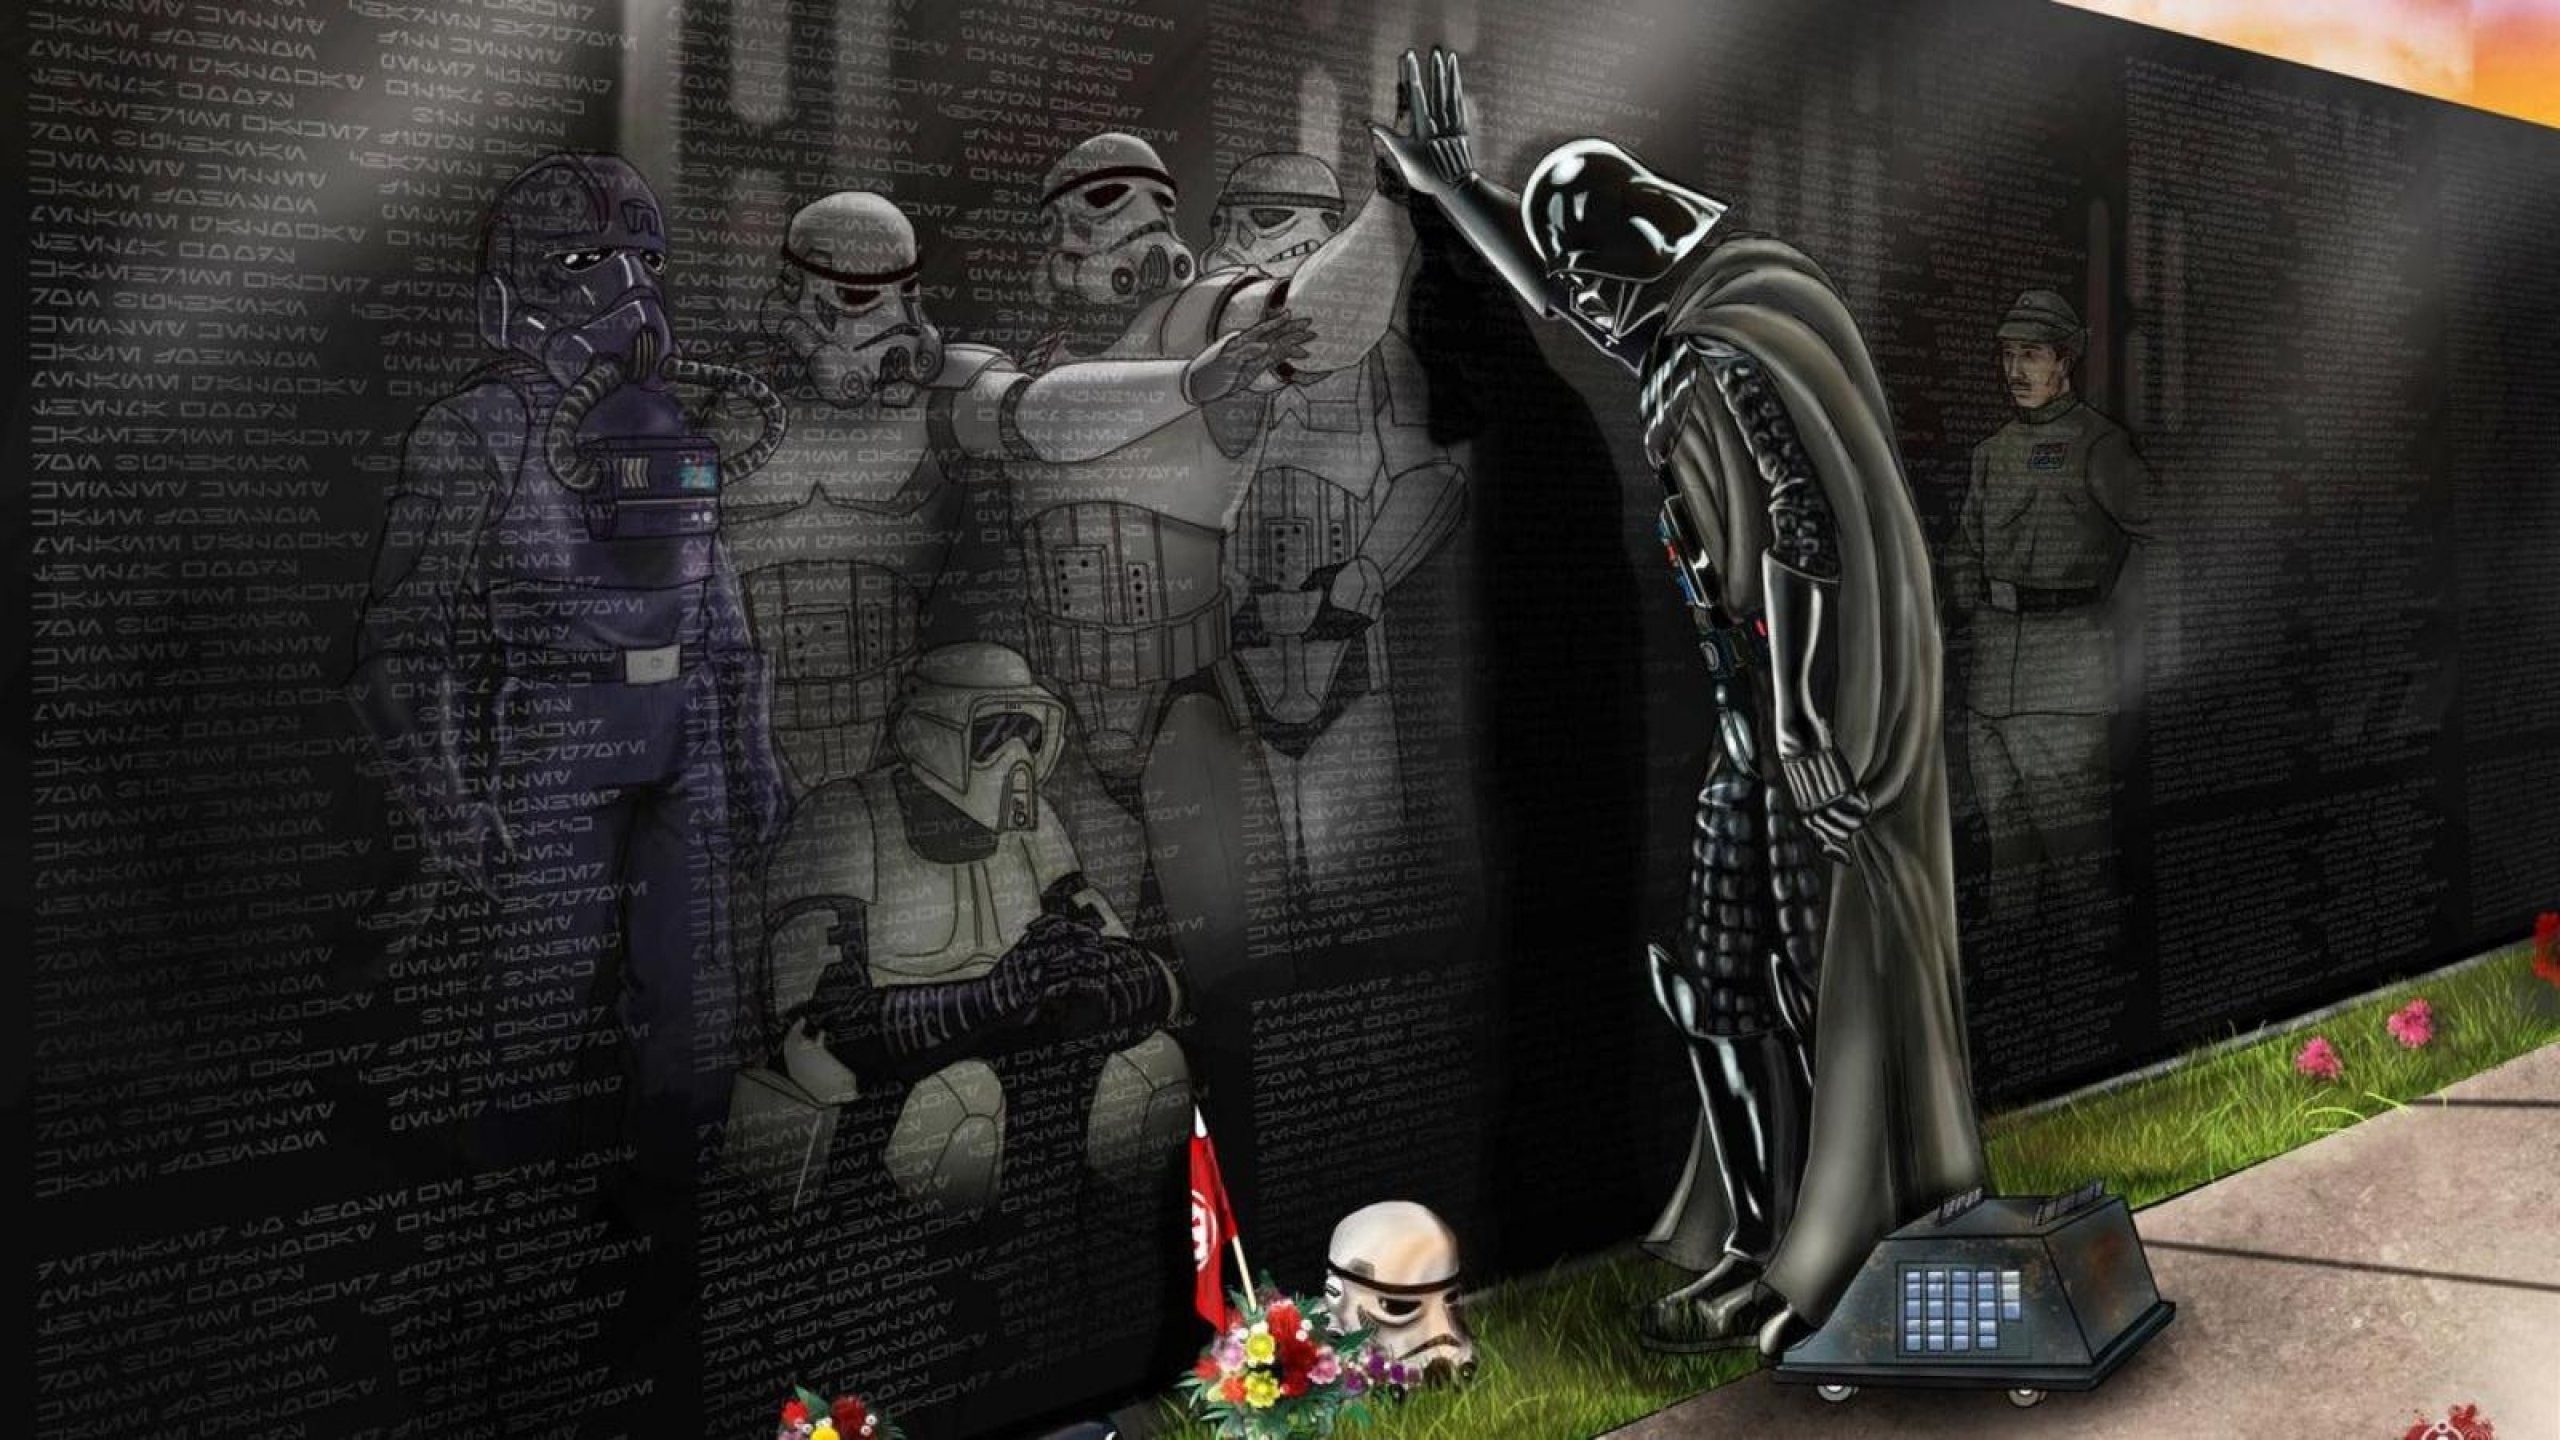 2560x1440 Star Wars Darth Vader Funny - Image #3493 - Licence: Free for Personal Use